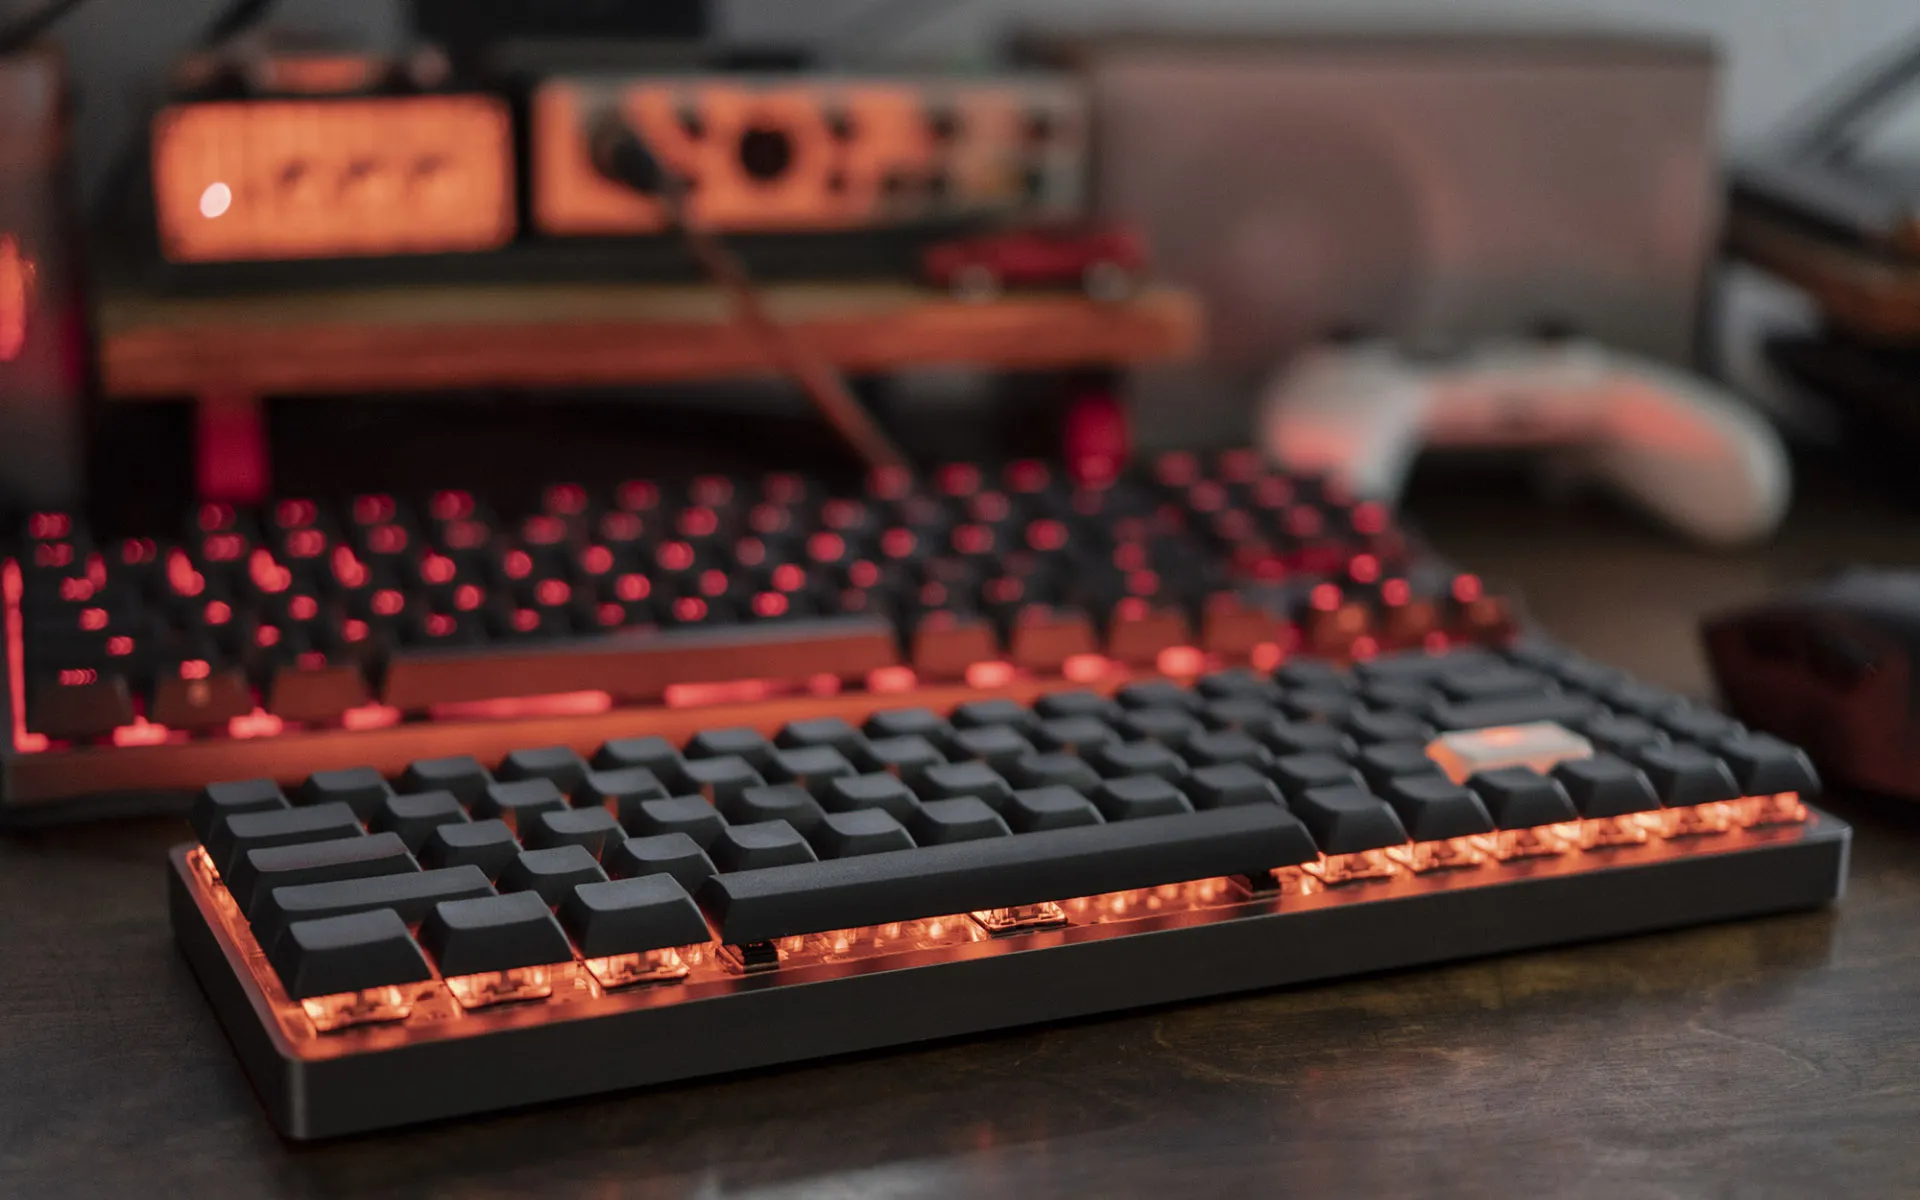 Black and charcoal keyboard with red underglow on a wooden desktop.